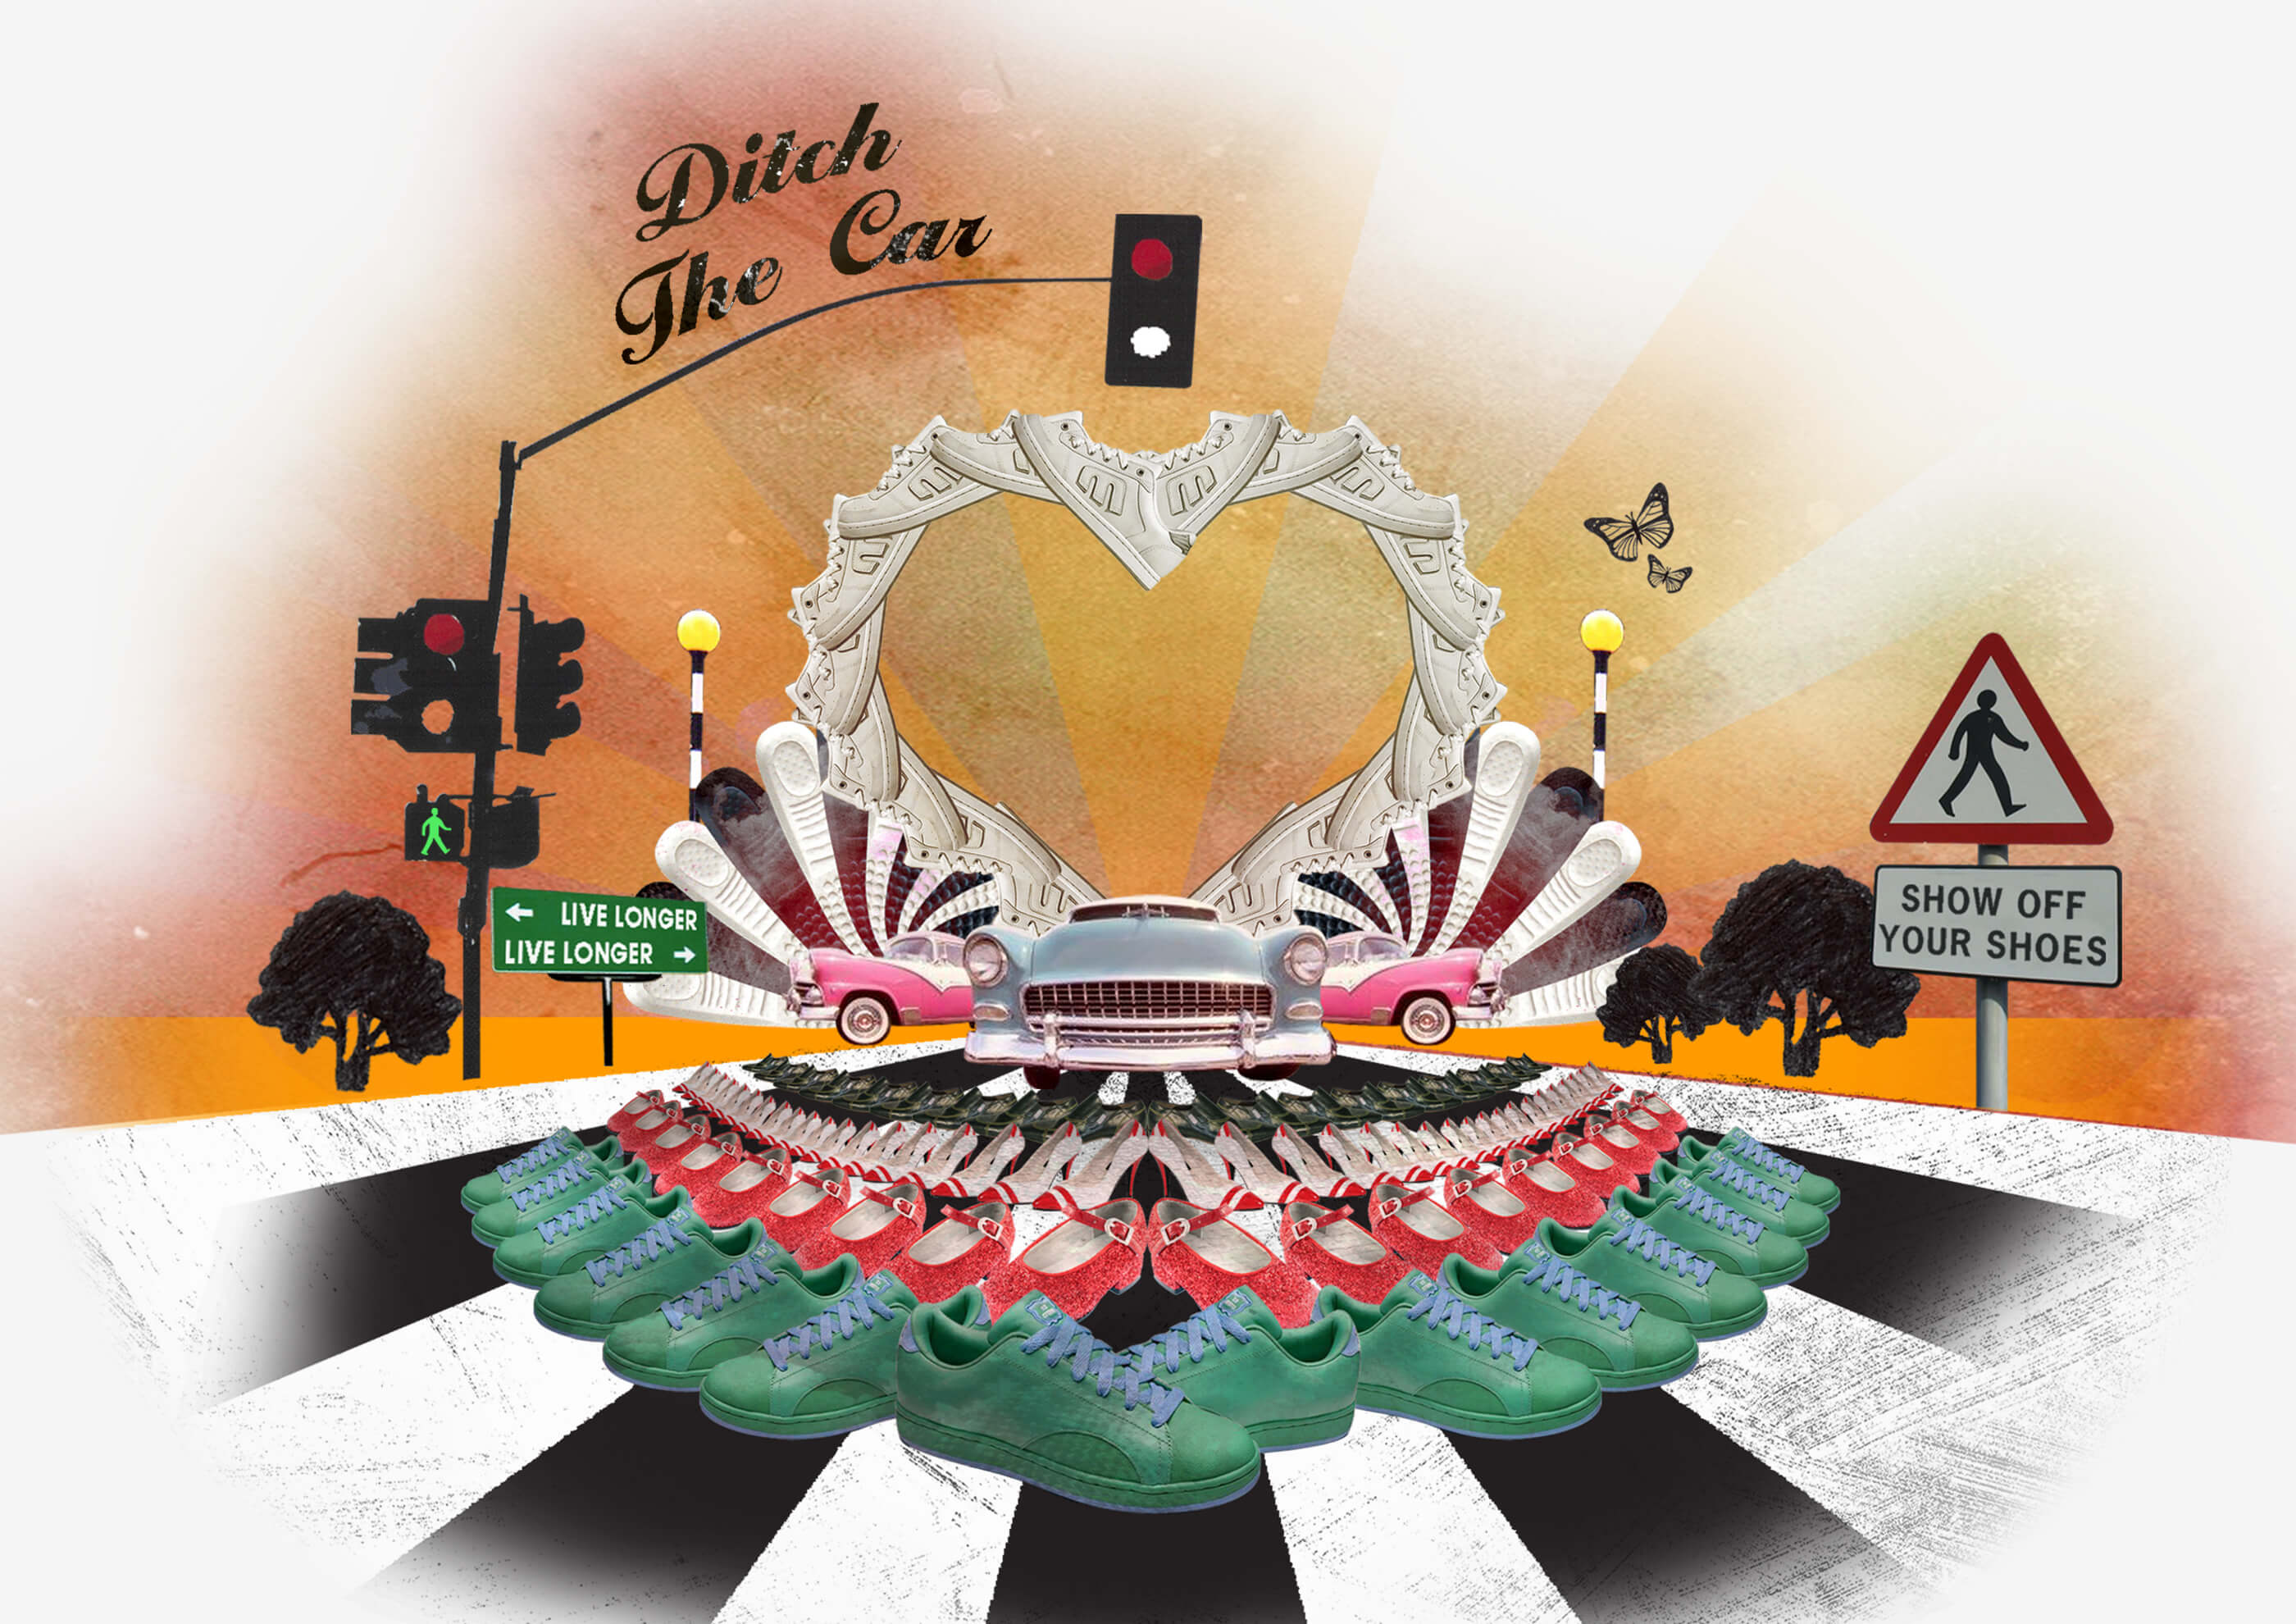 'Ditch the Car, Show Off Your Shoes' t shirt illustration, featuring a heart made of trainers, road signs and classic American cars